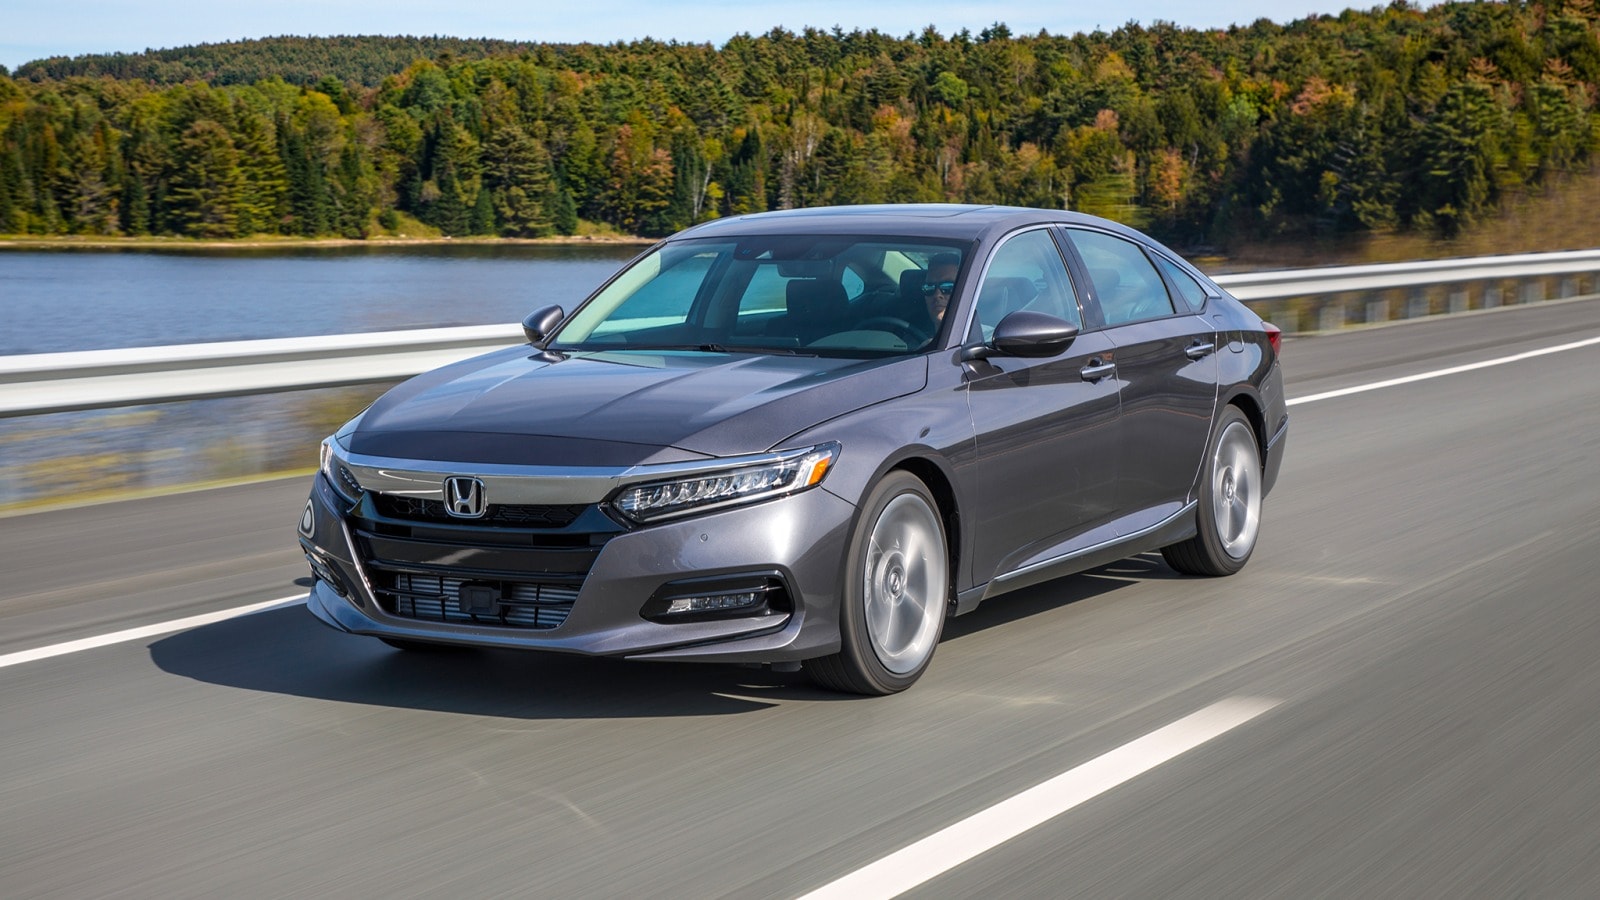 Image result for 2018 honda accord